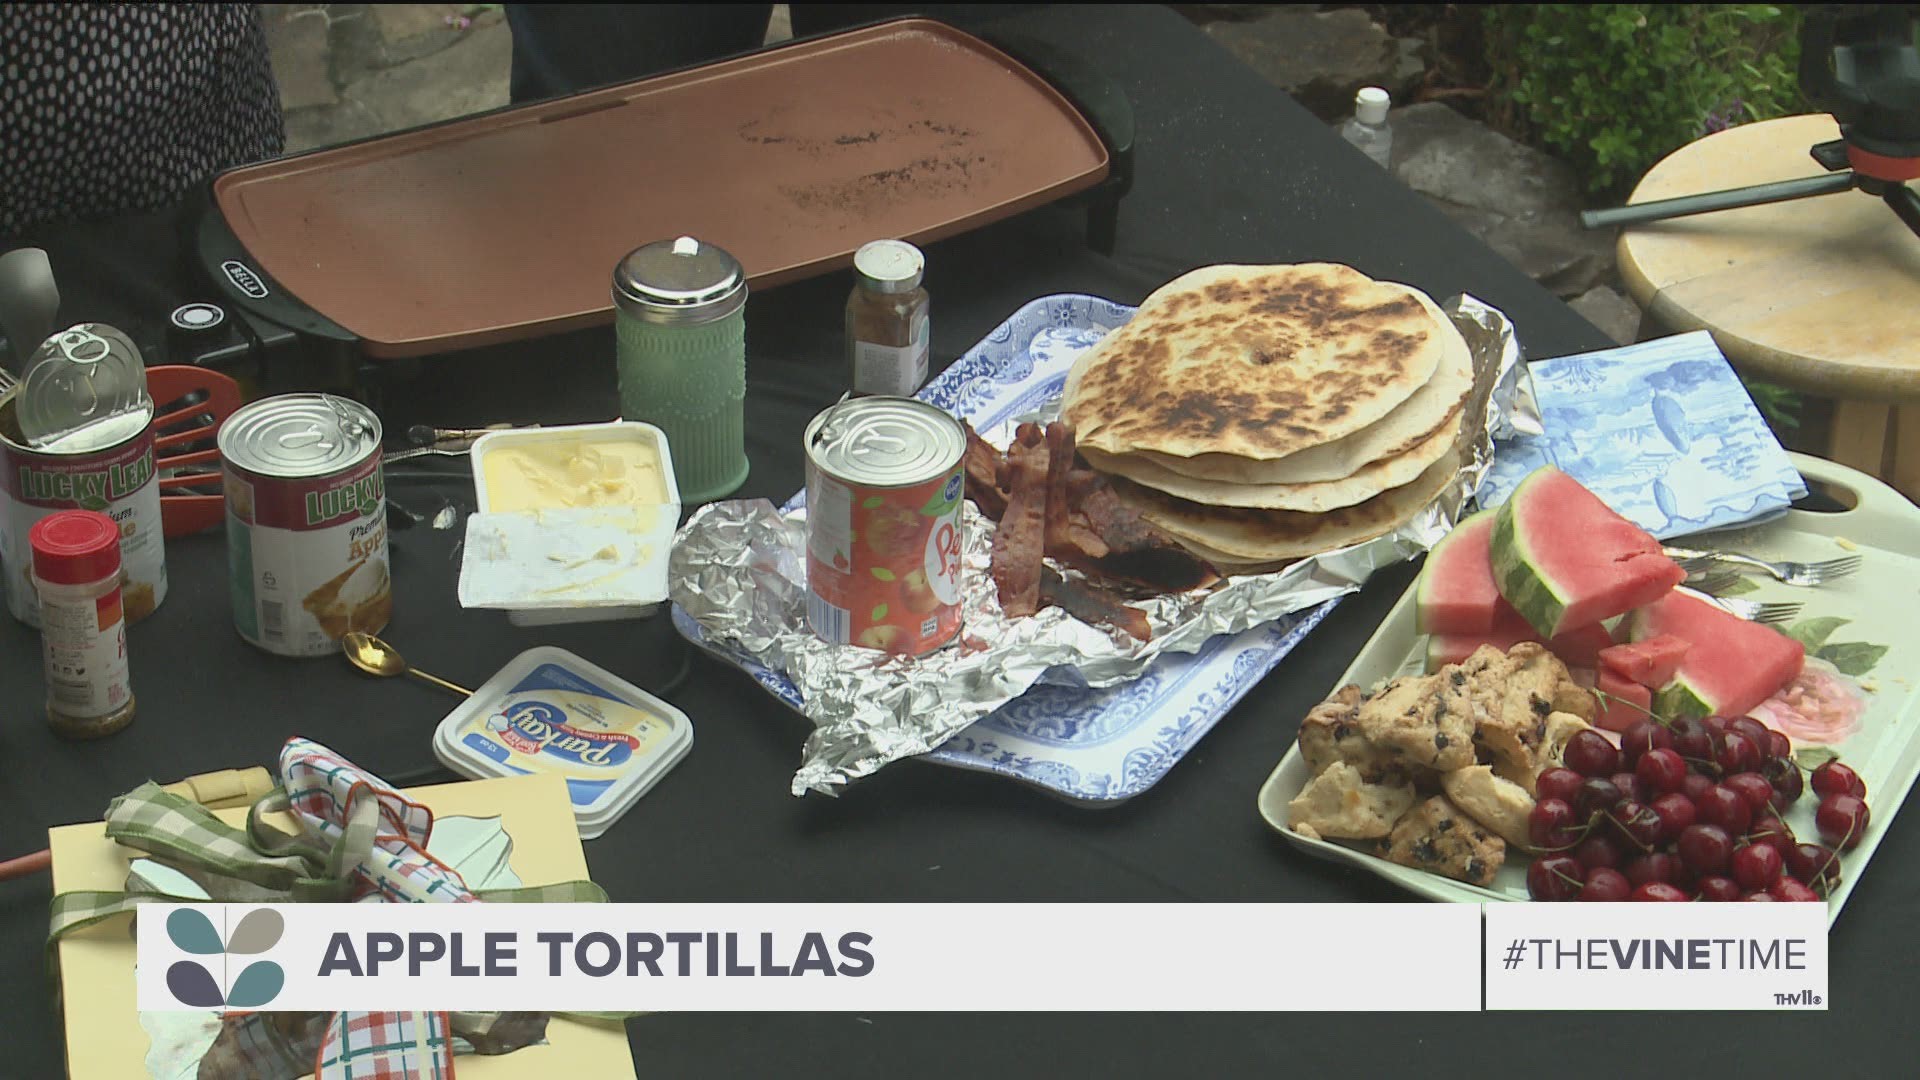 Pat Downs with Sweet Yellow Cornbread shows us how to make yummy apple tortillas with cinnamon, sugar, and more.